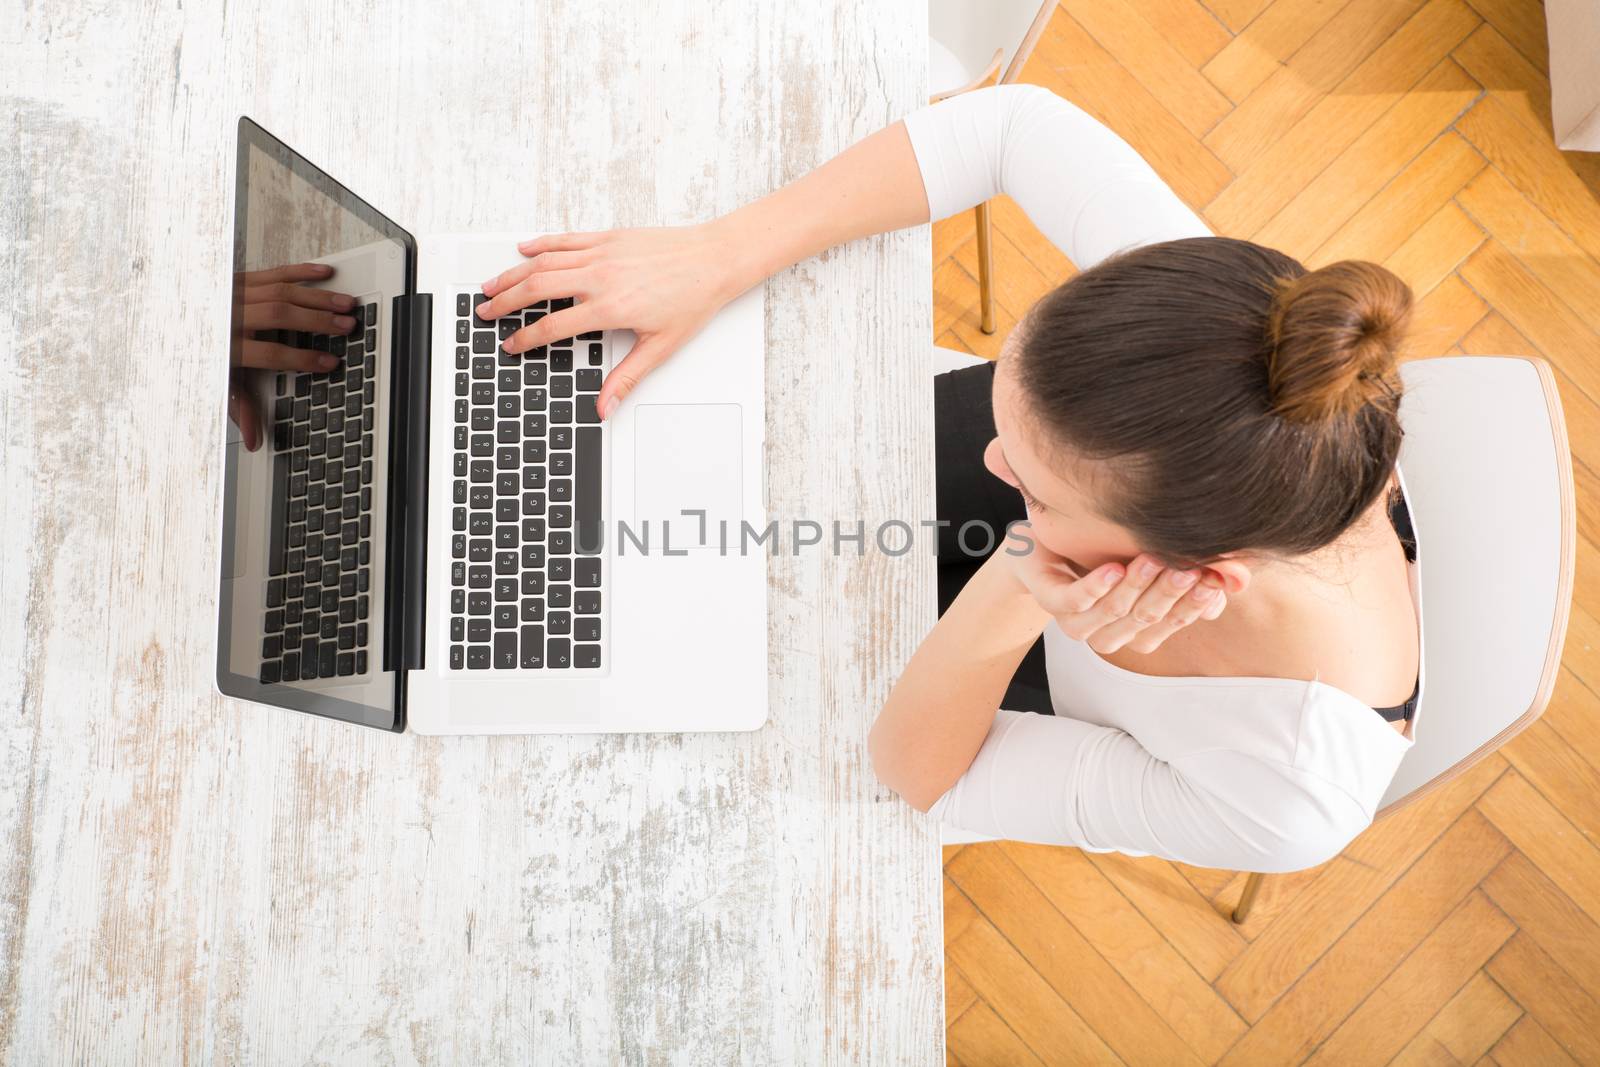 A young adult woman working on a laptop.